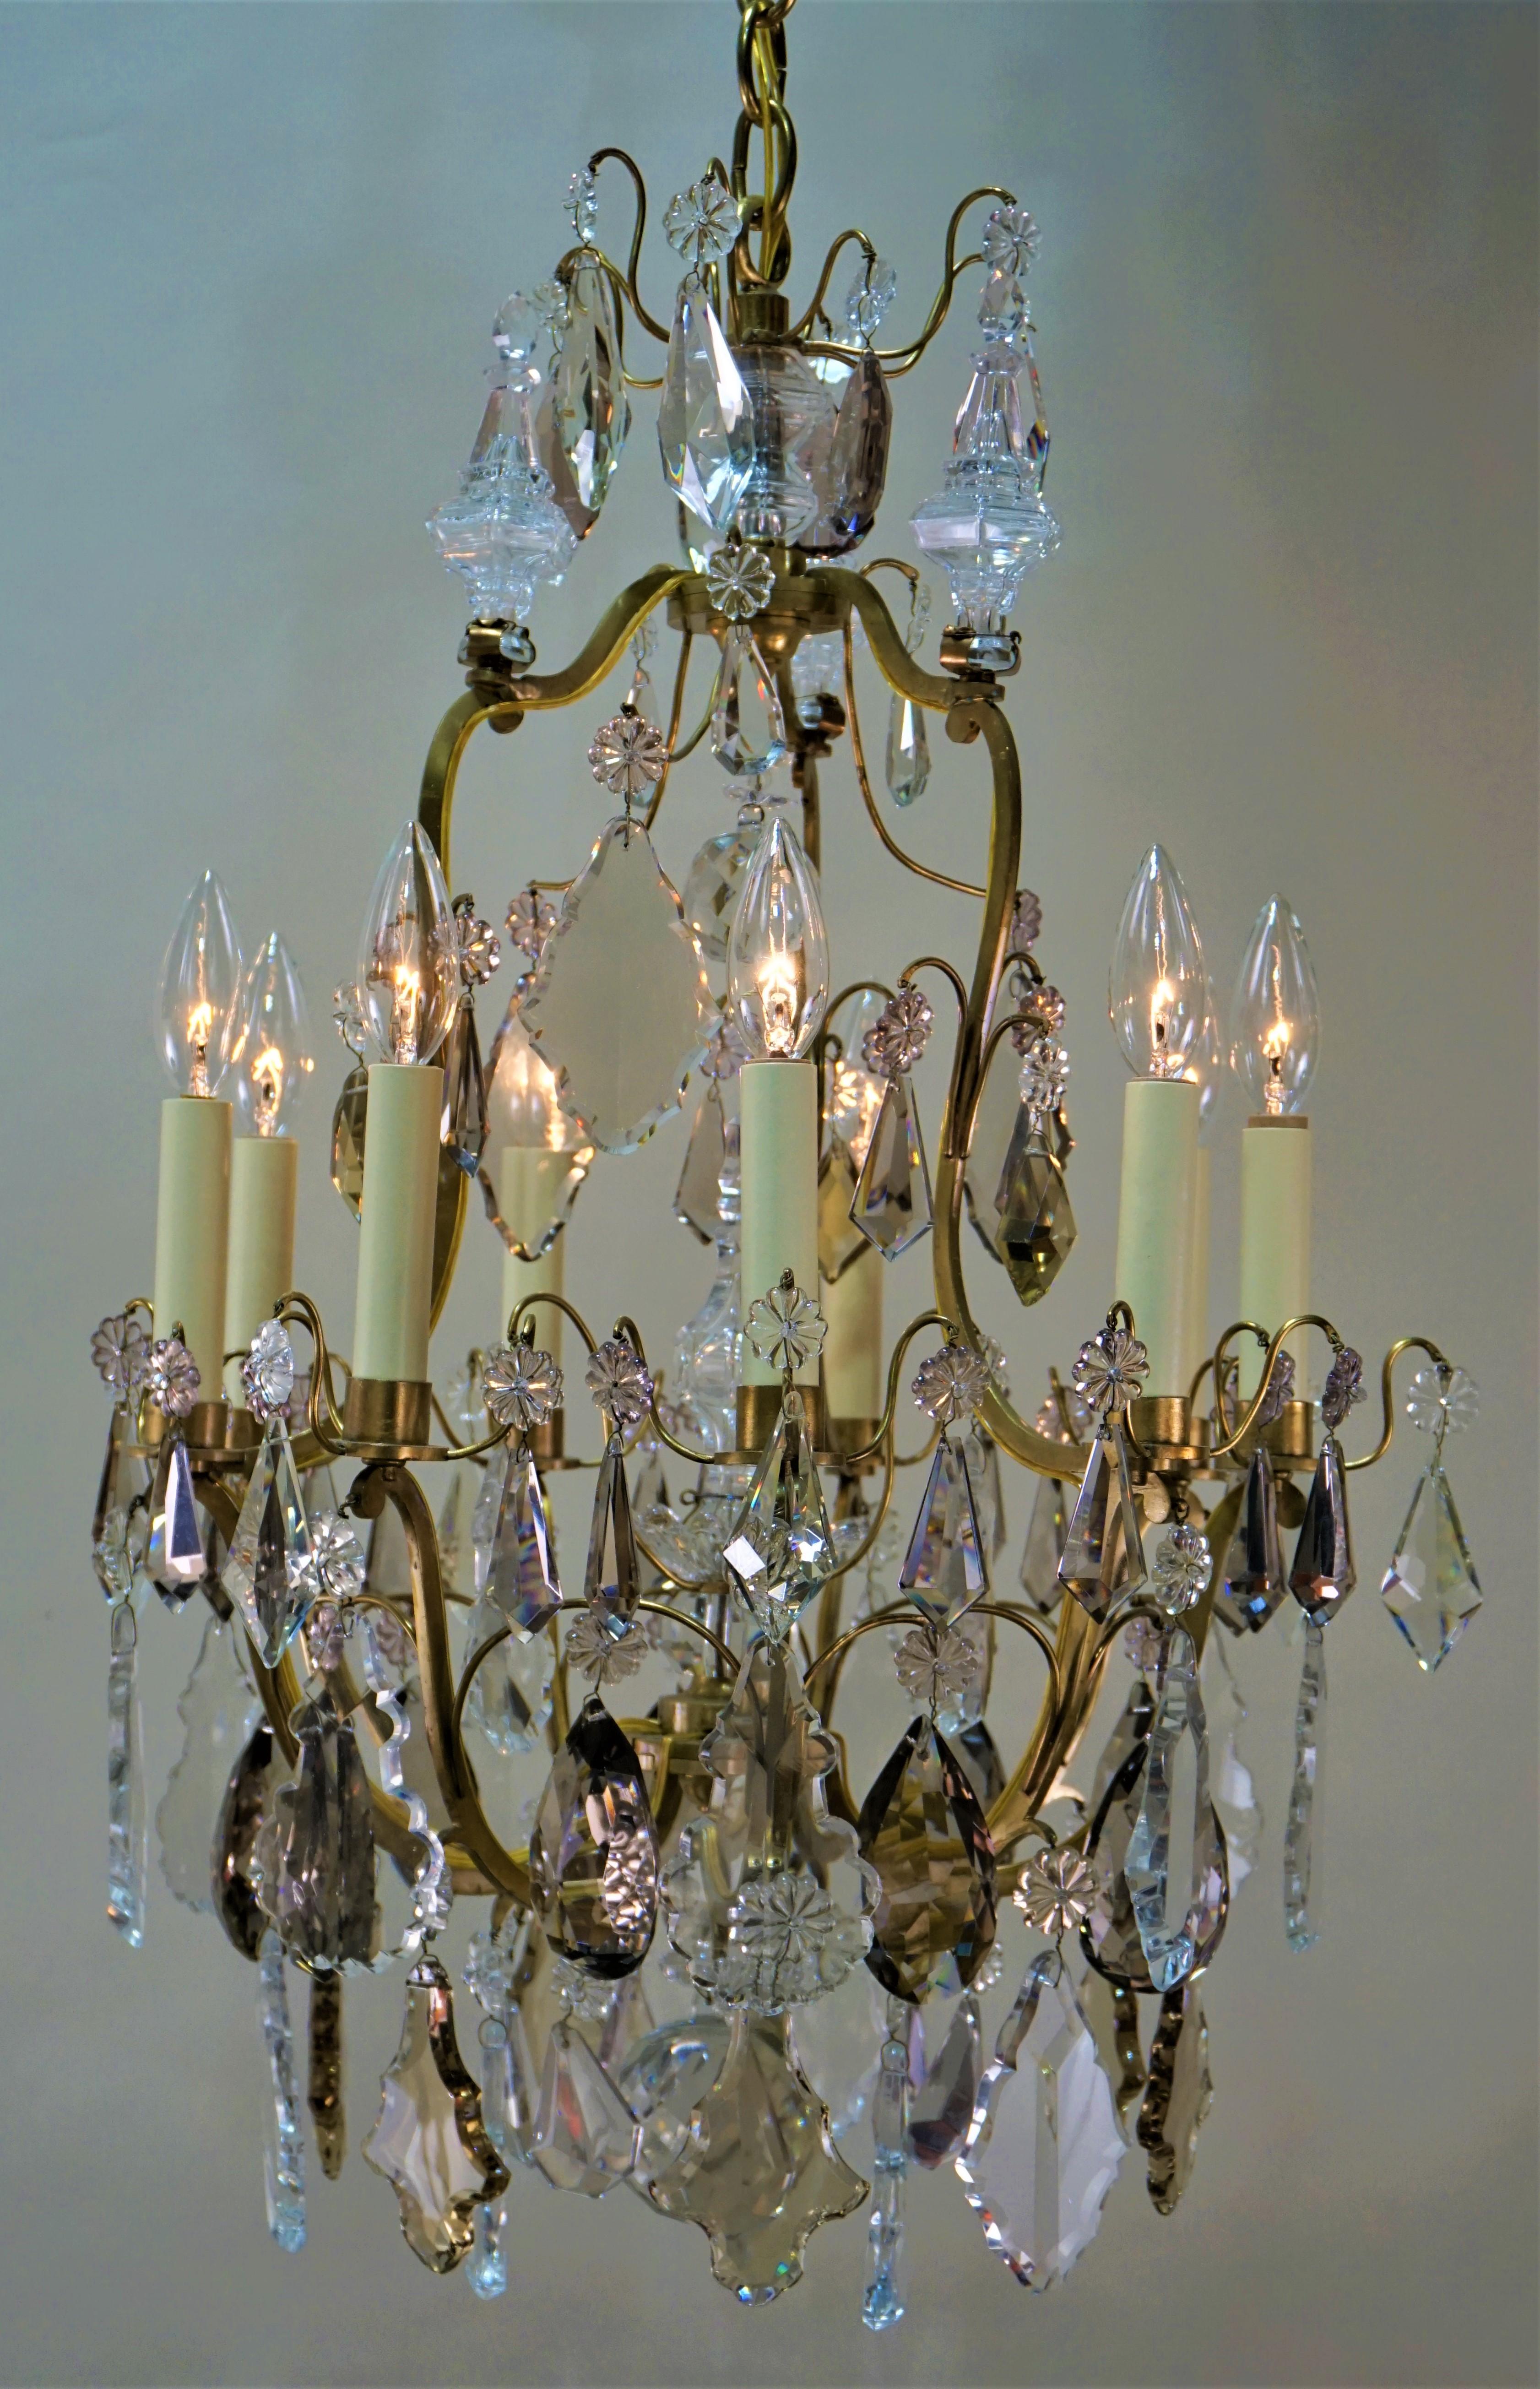 Clear and colorful crystal chandelier with elegant bronze frame.
Minimum height full installed 32